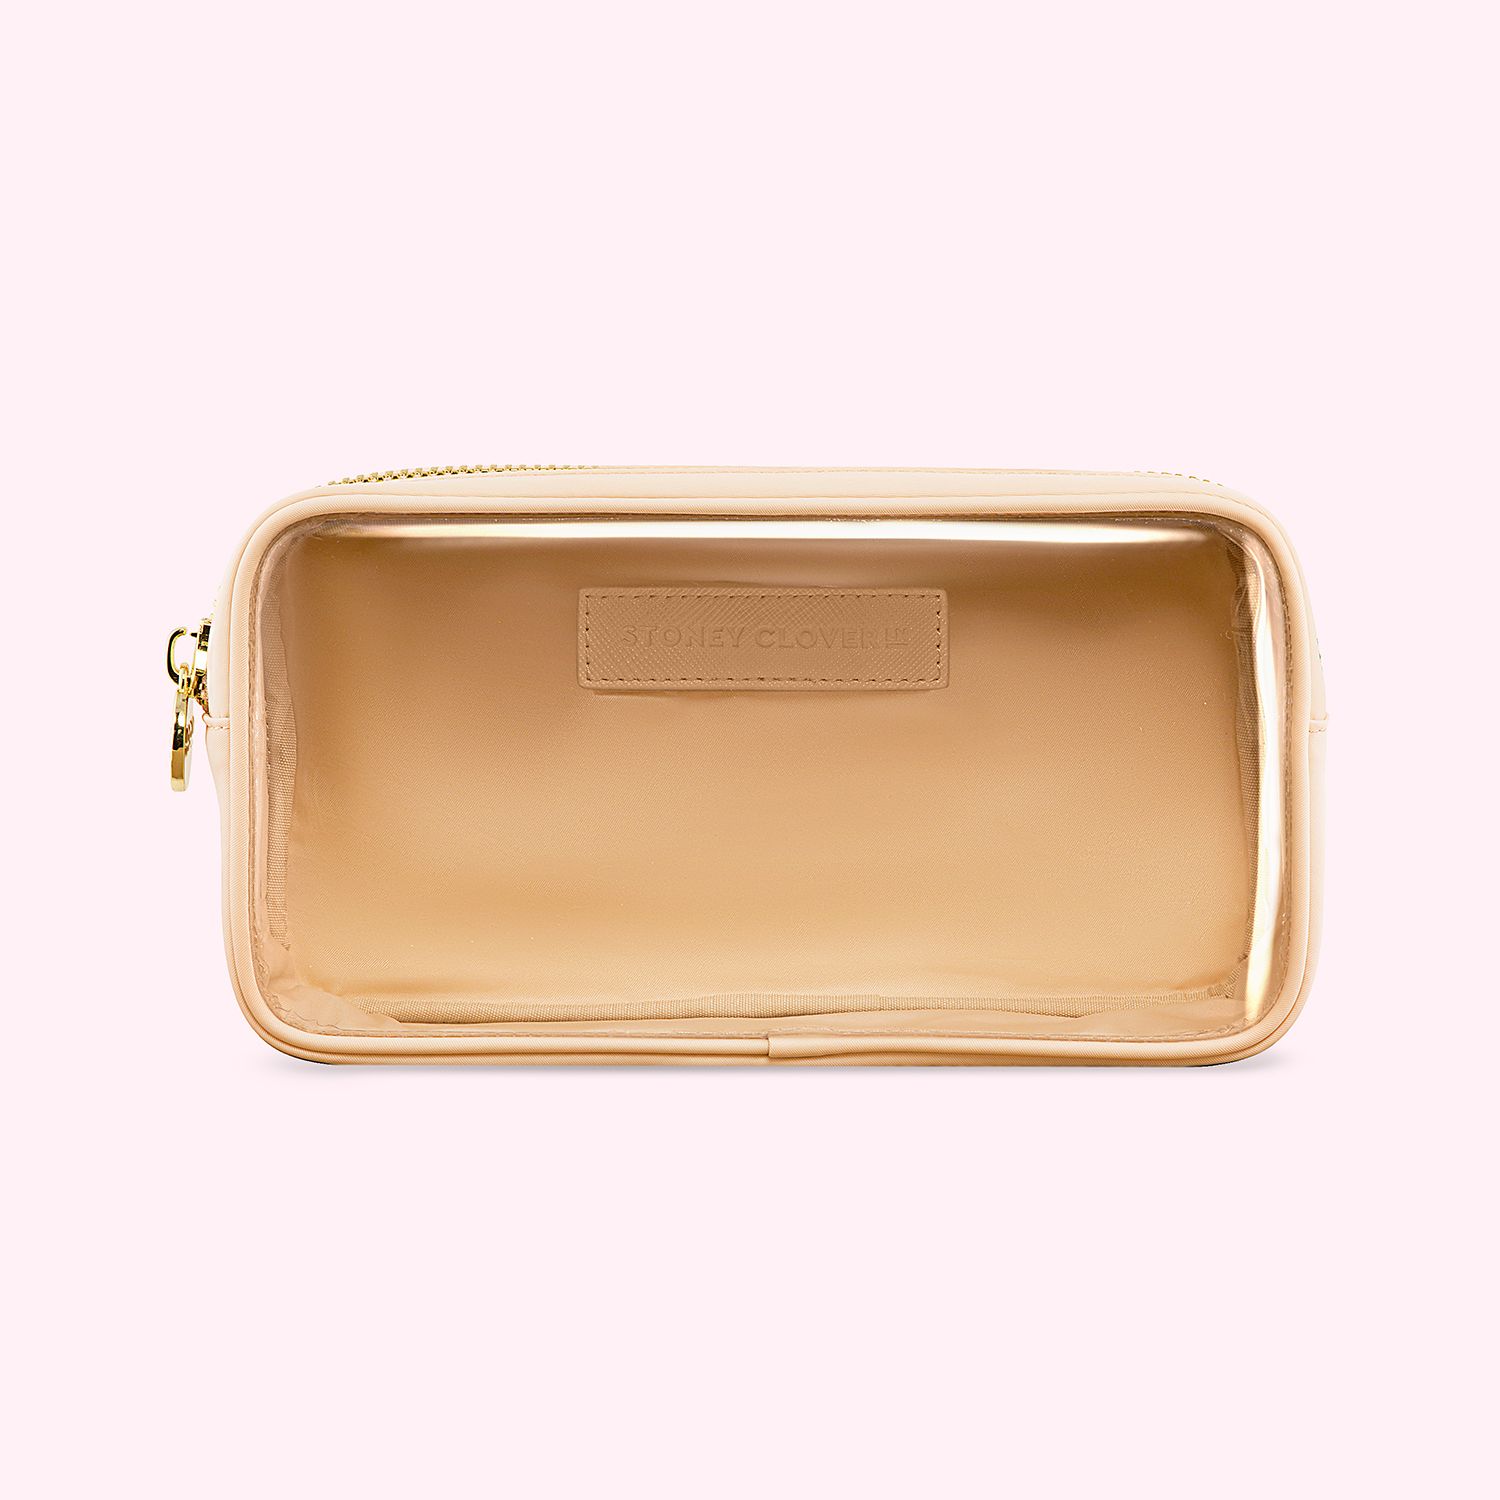 Classic Clear Front Small Pouch | Stoney Clover Lane | Stoney Clover Lane